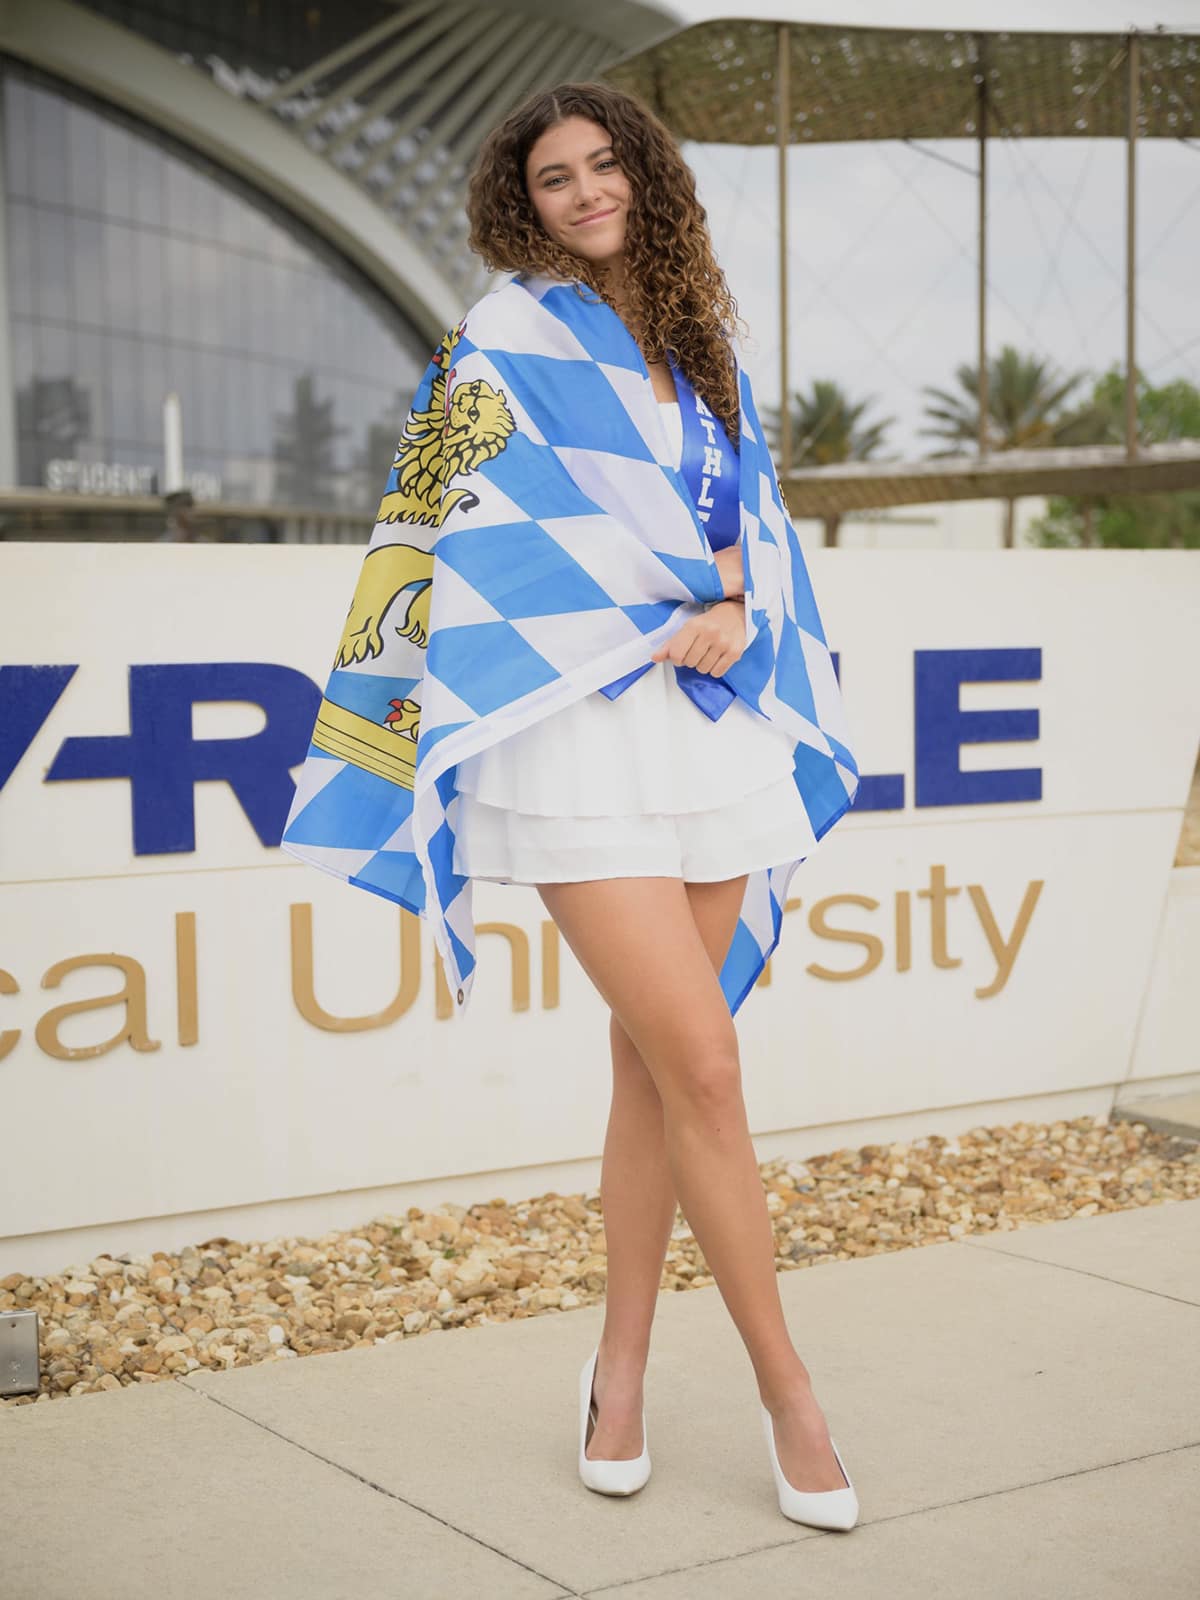 Julia wearing a blue and white flag with a gold lion around her shoulders, a short white skirt, and white pumps.